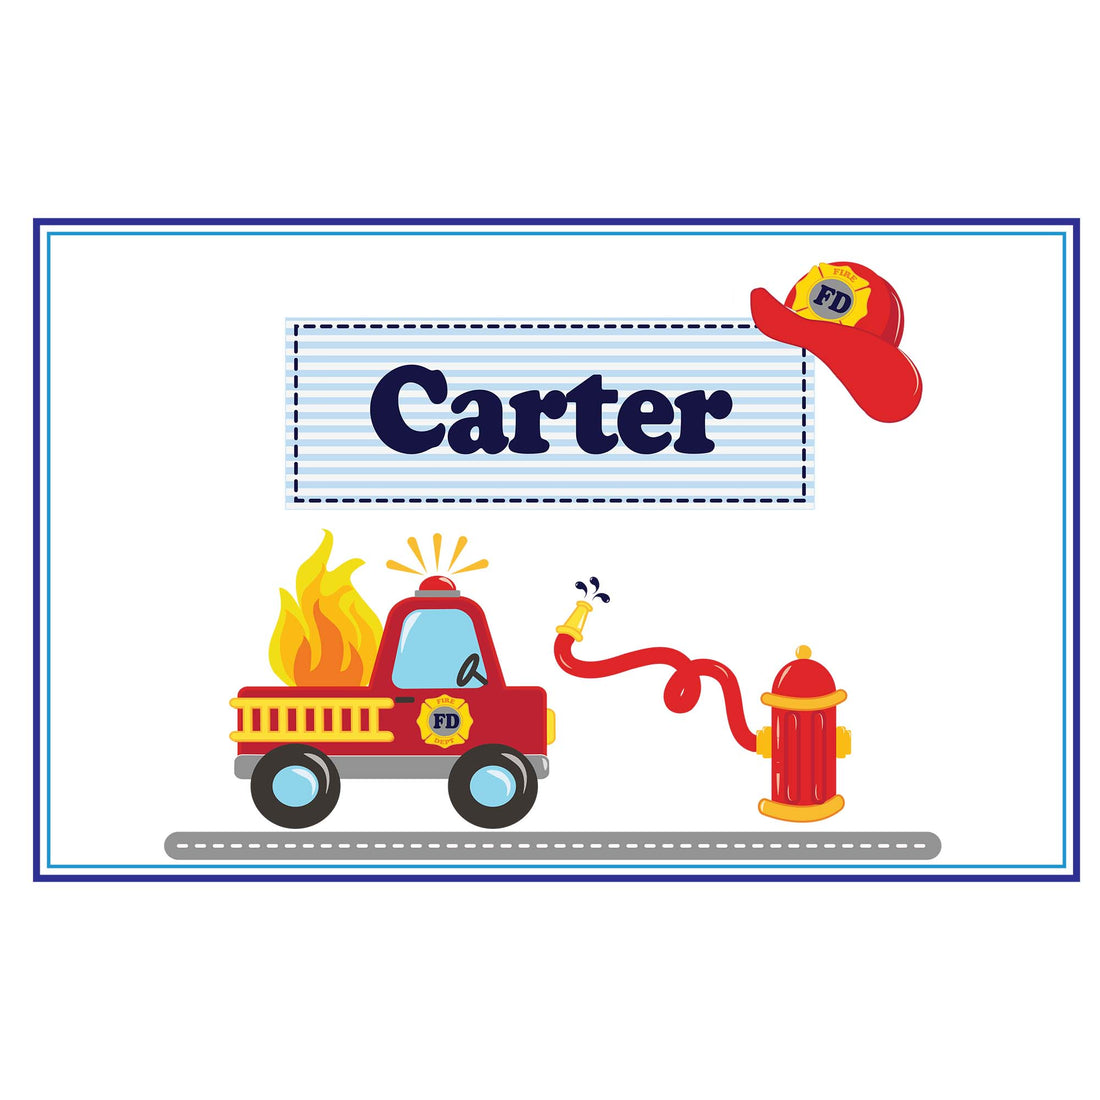 Personalized Placemat with Fire Truck design